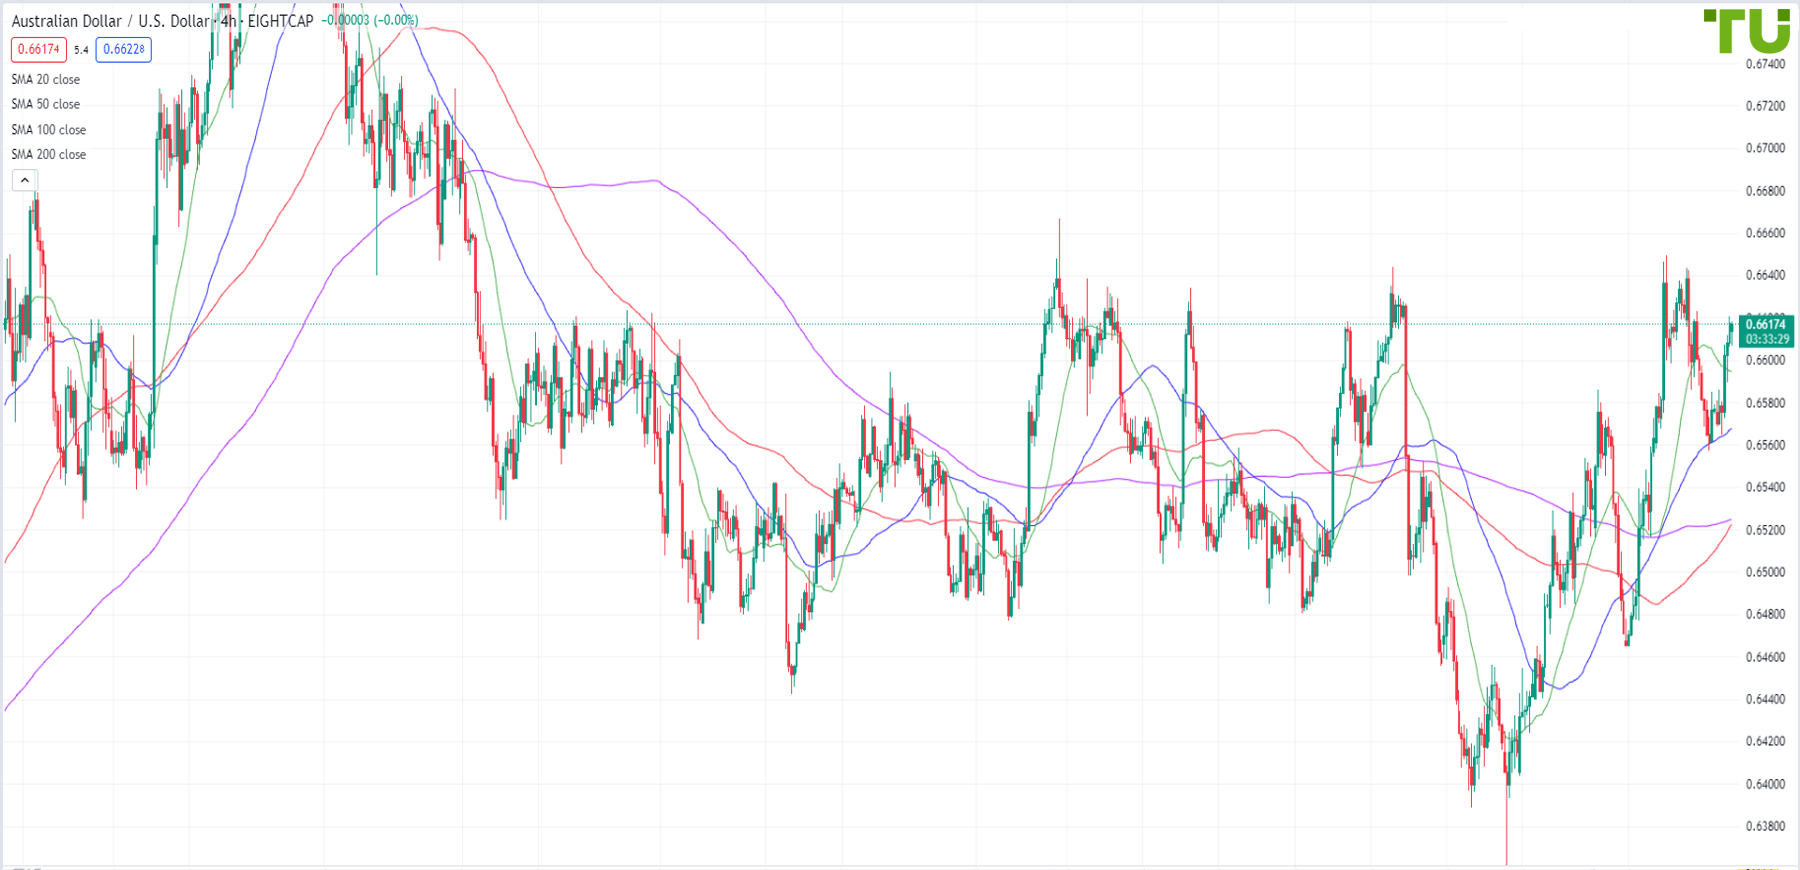 AUD/USD is bought from support